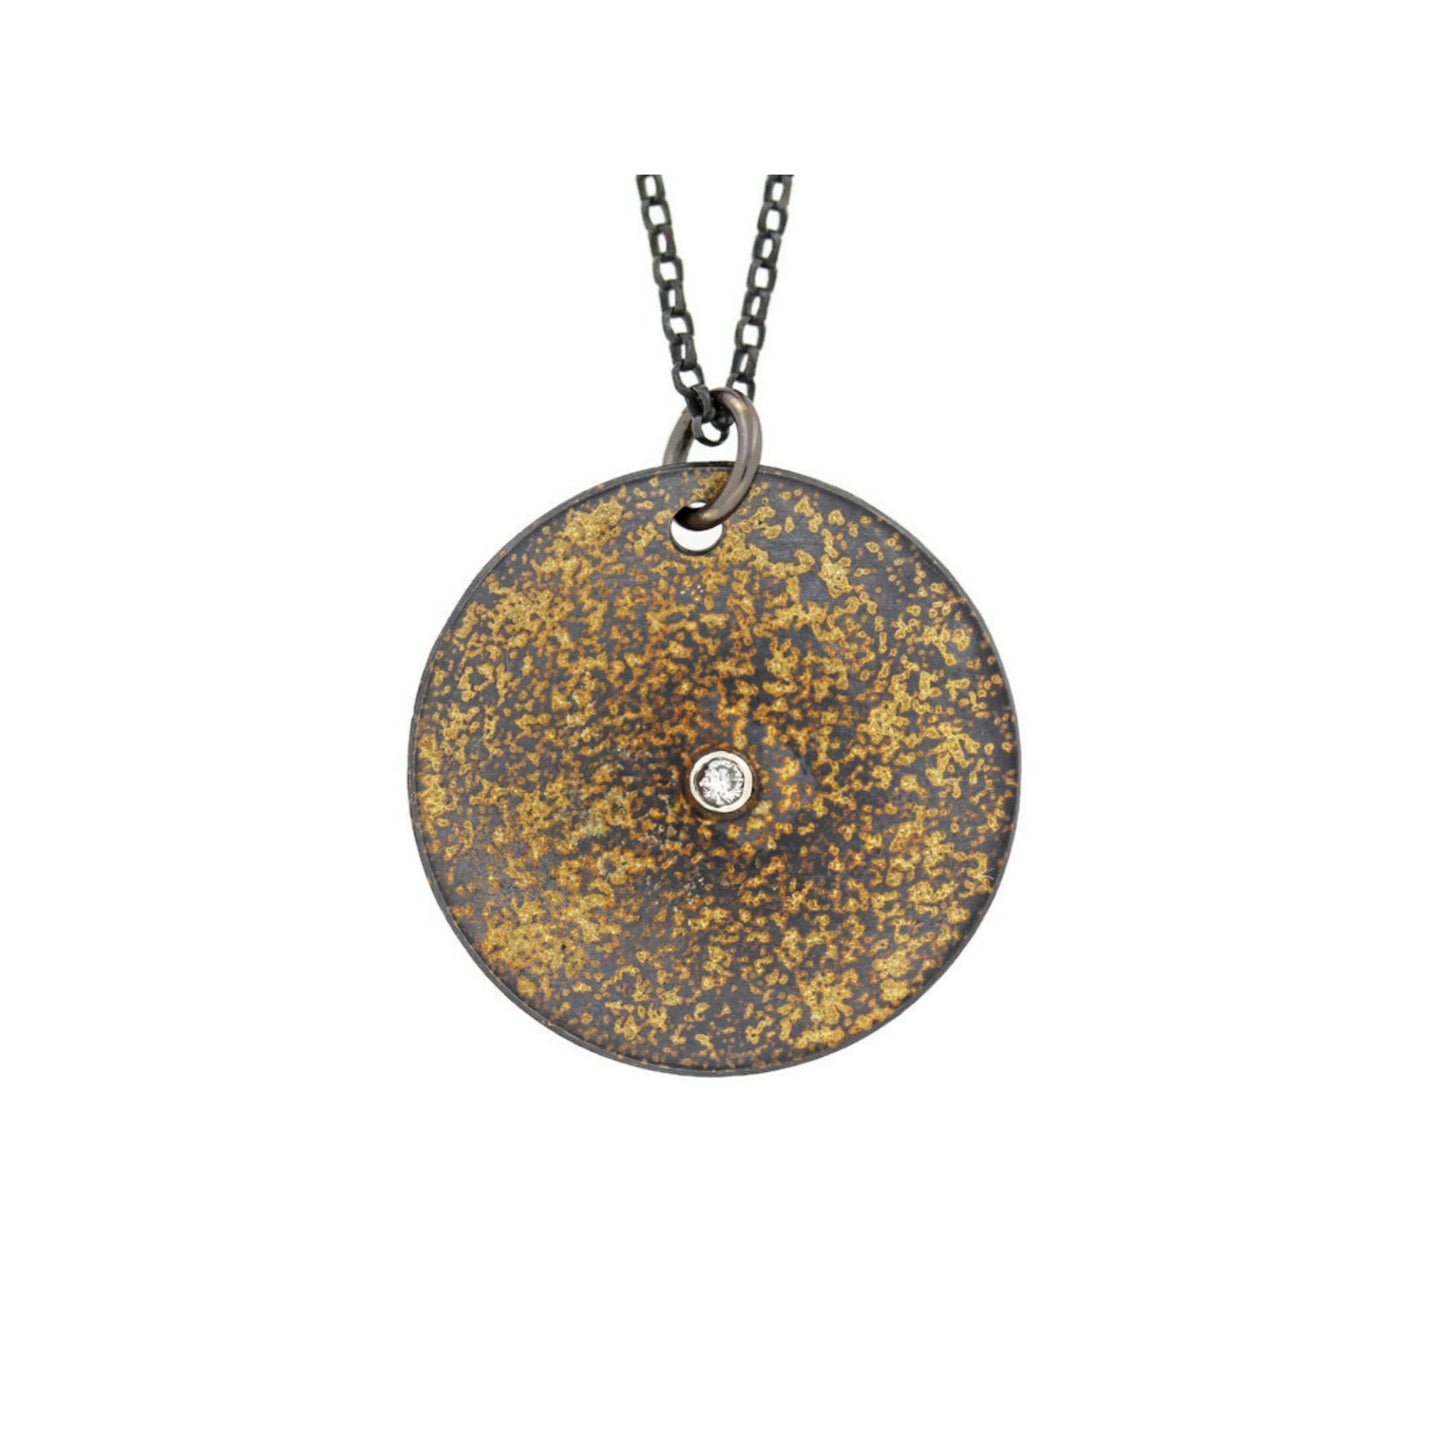 Galaxy diamond and gold necklace by Jen Lesea Designs